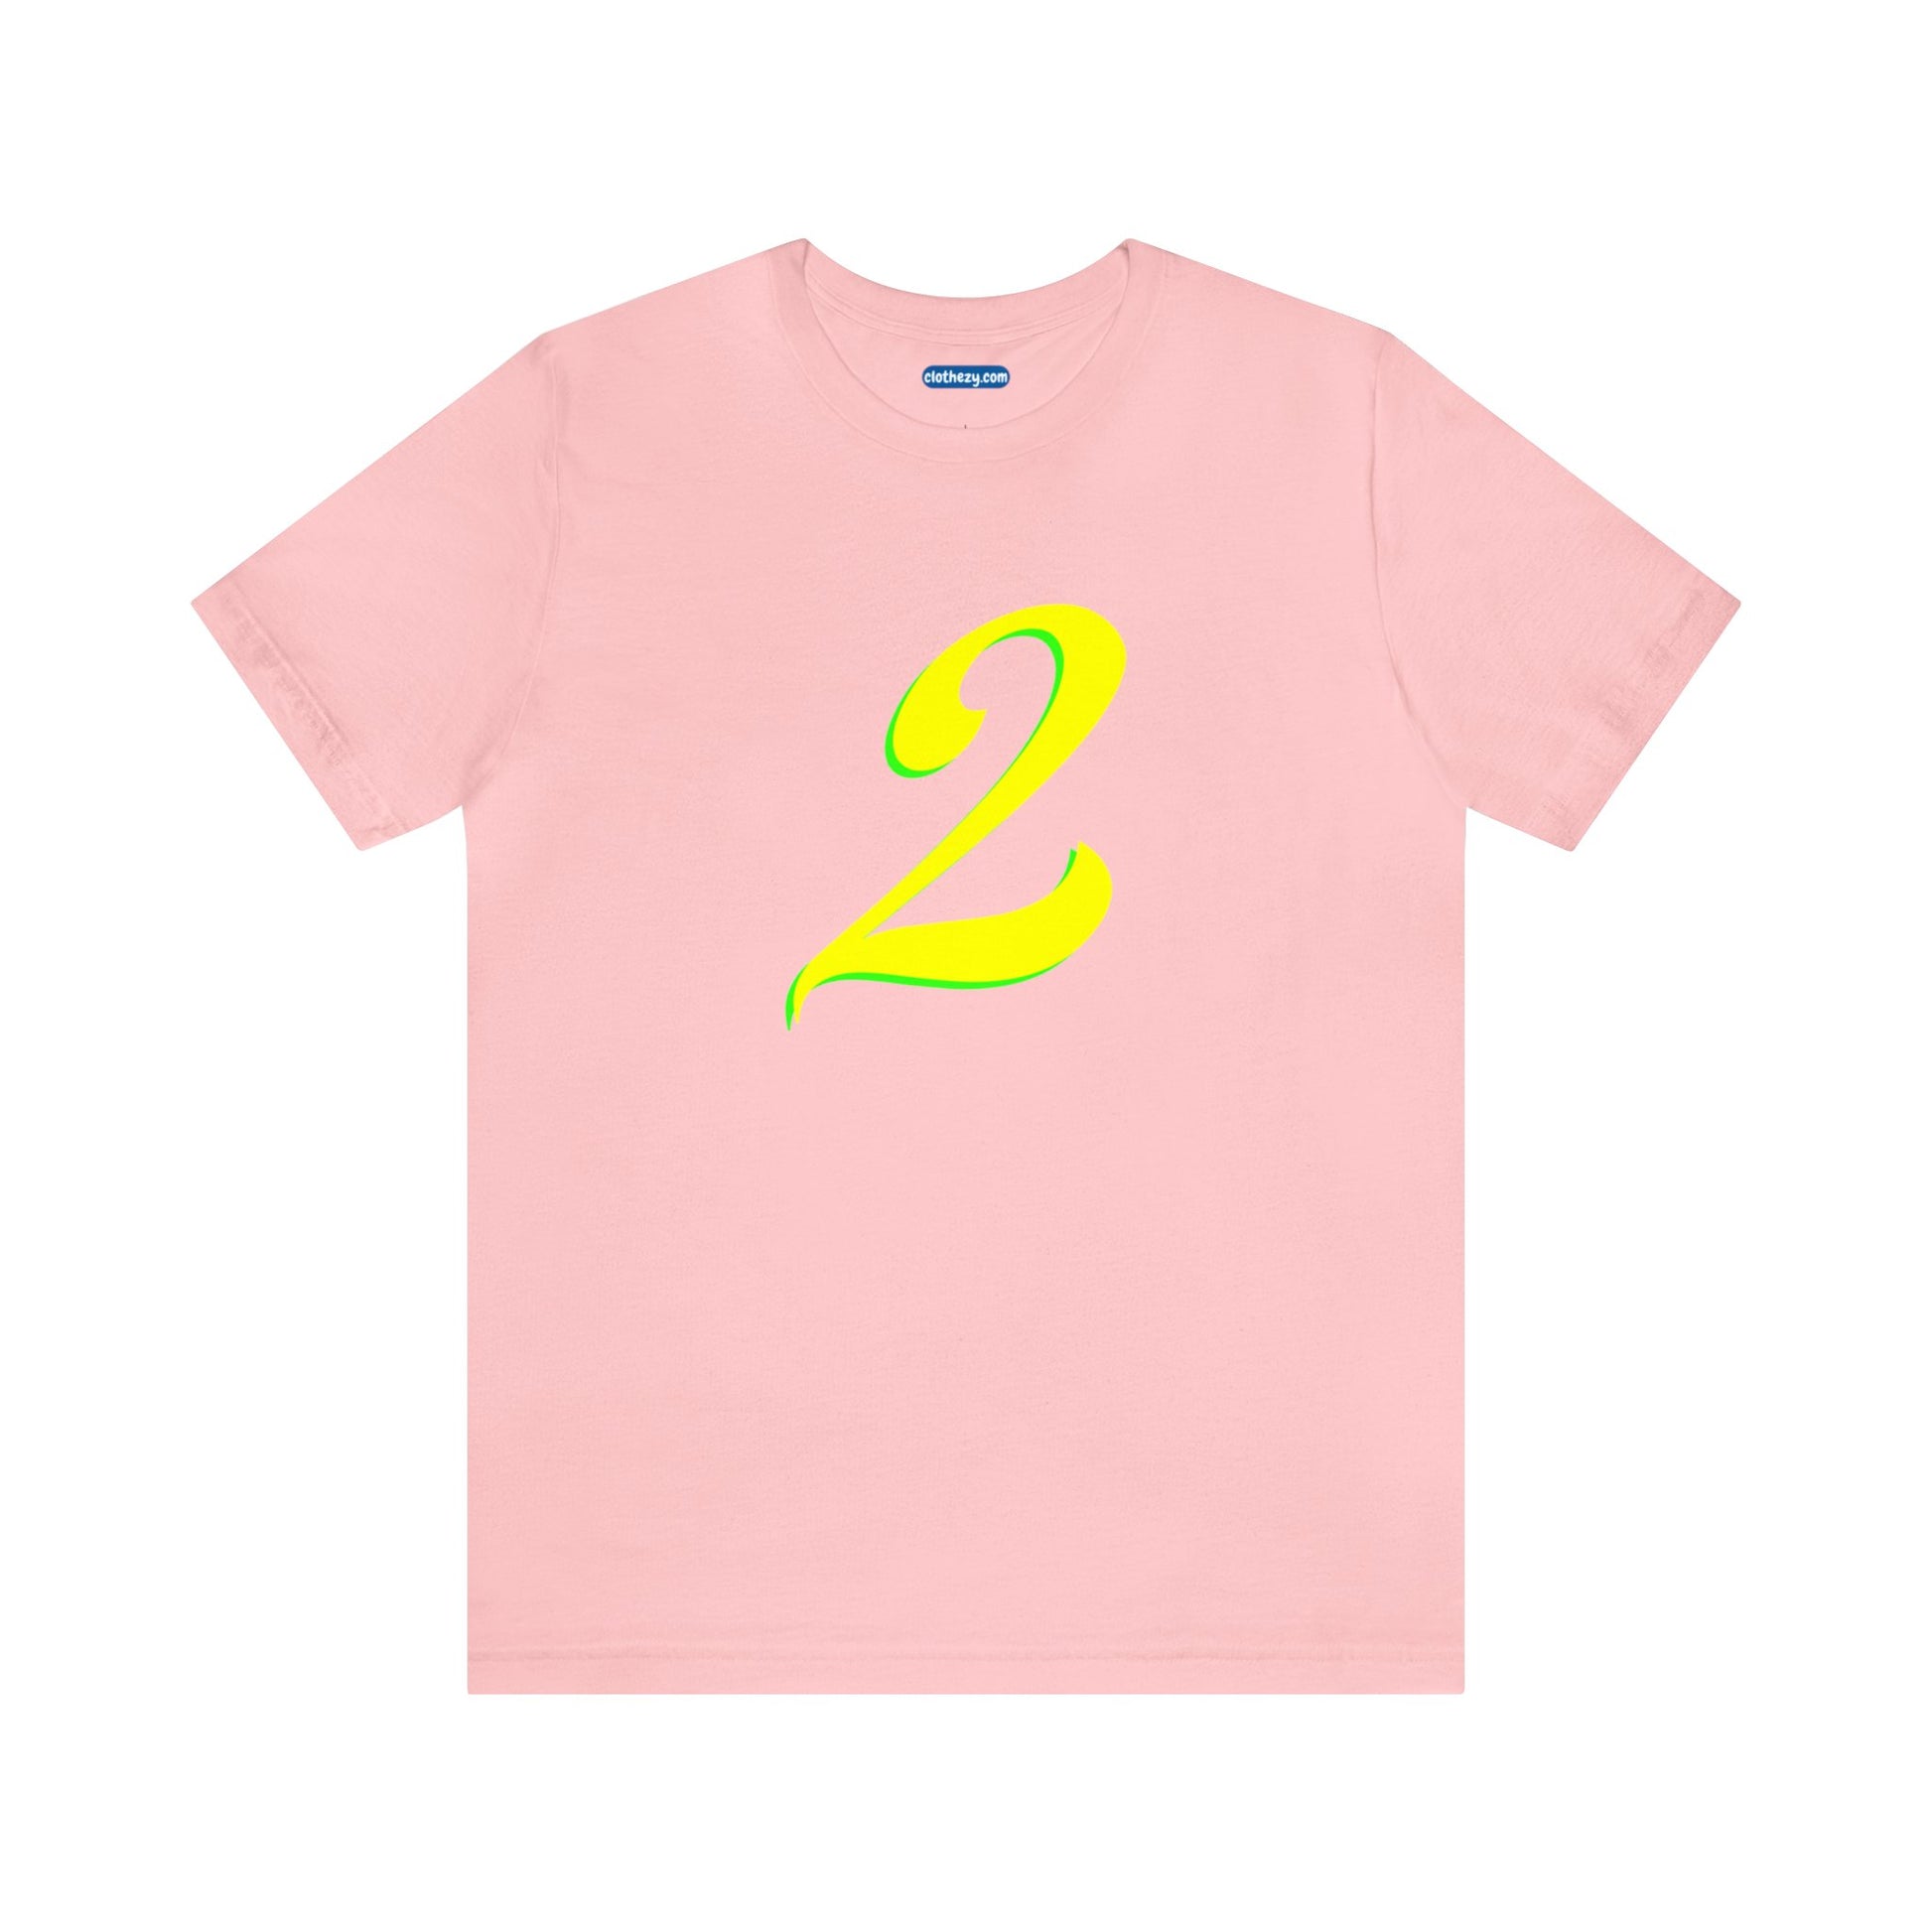 Number 2 Design - Soft Cotton Tee for birthdays and celebrations, Gift for friends and family, Multiple Options by clothezy.com in Red Size Small - Buy Now